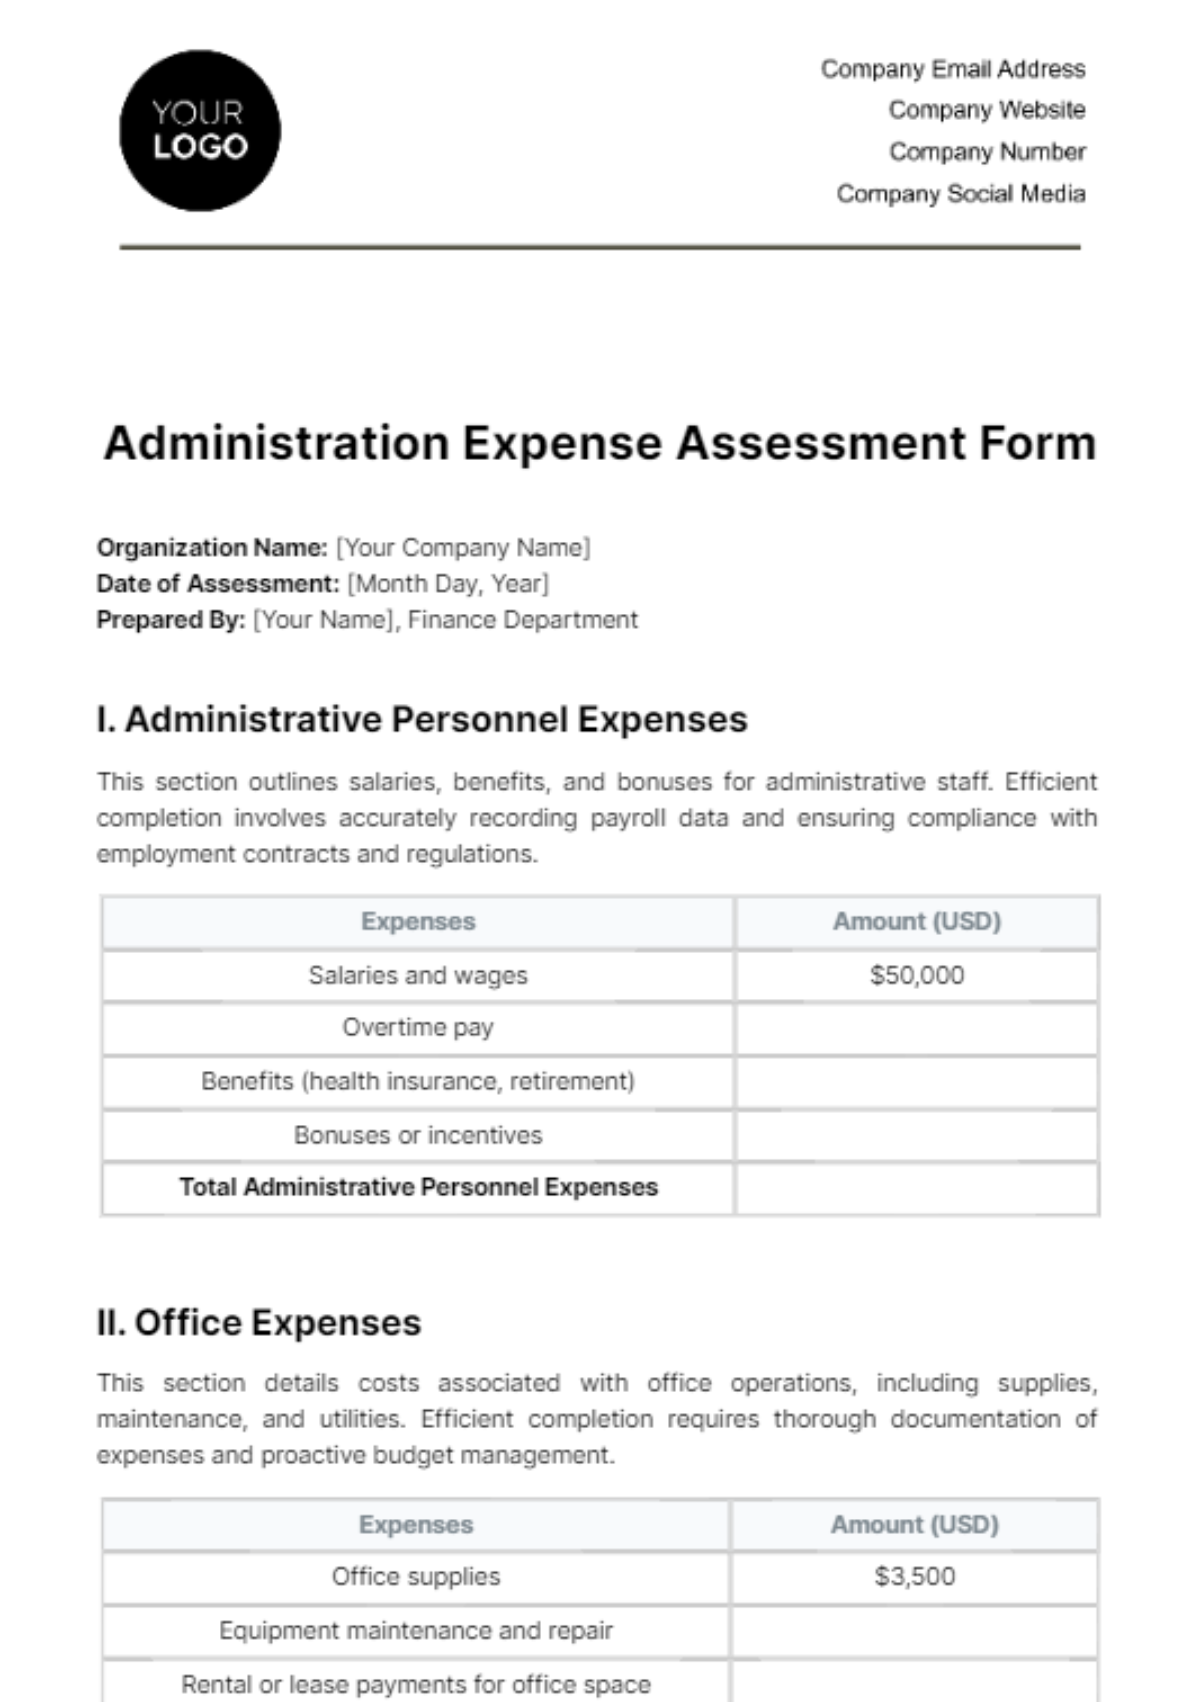 Free Administration Expense Assessment Form Template